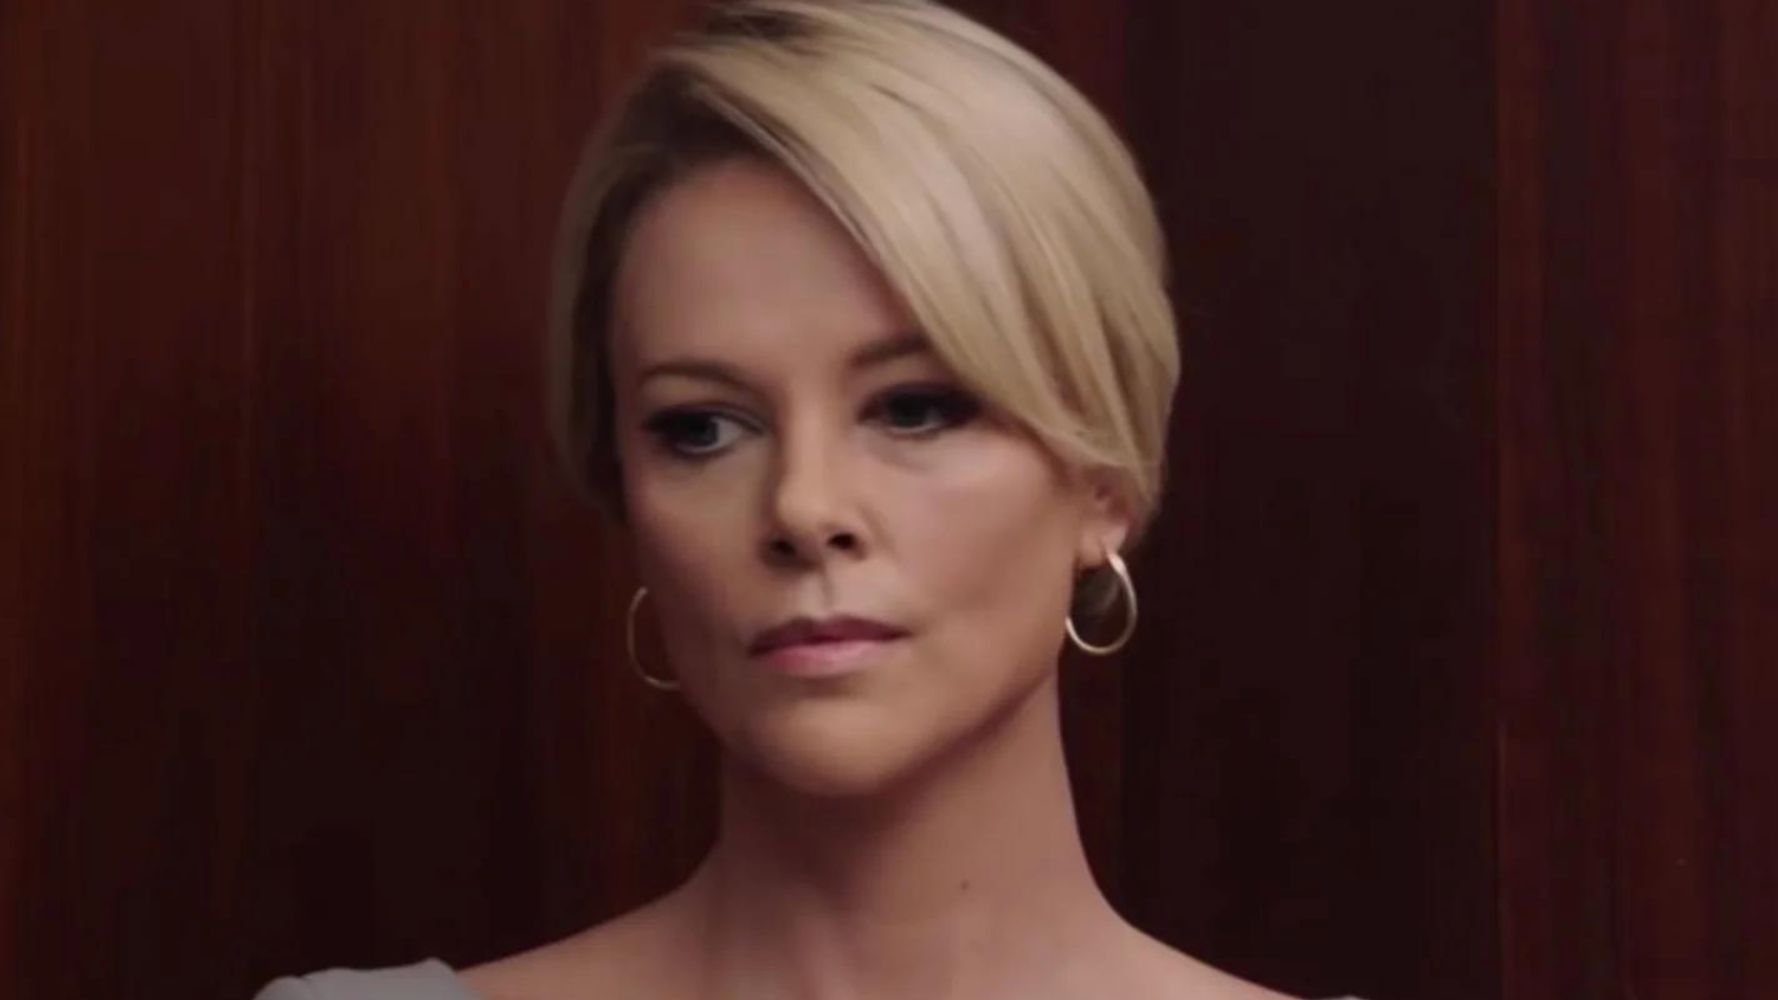 Charlize Theron Transforms Into Megyn Kelly In Tense 'Bombshell' Trailer | HuffPost